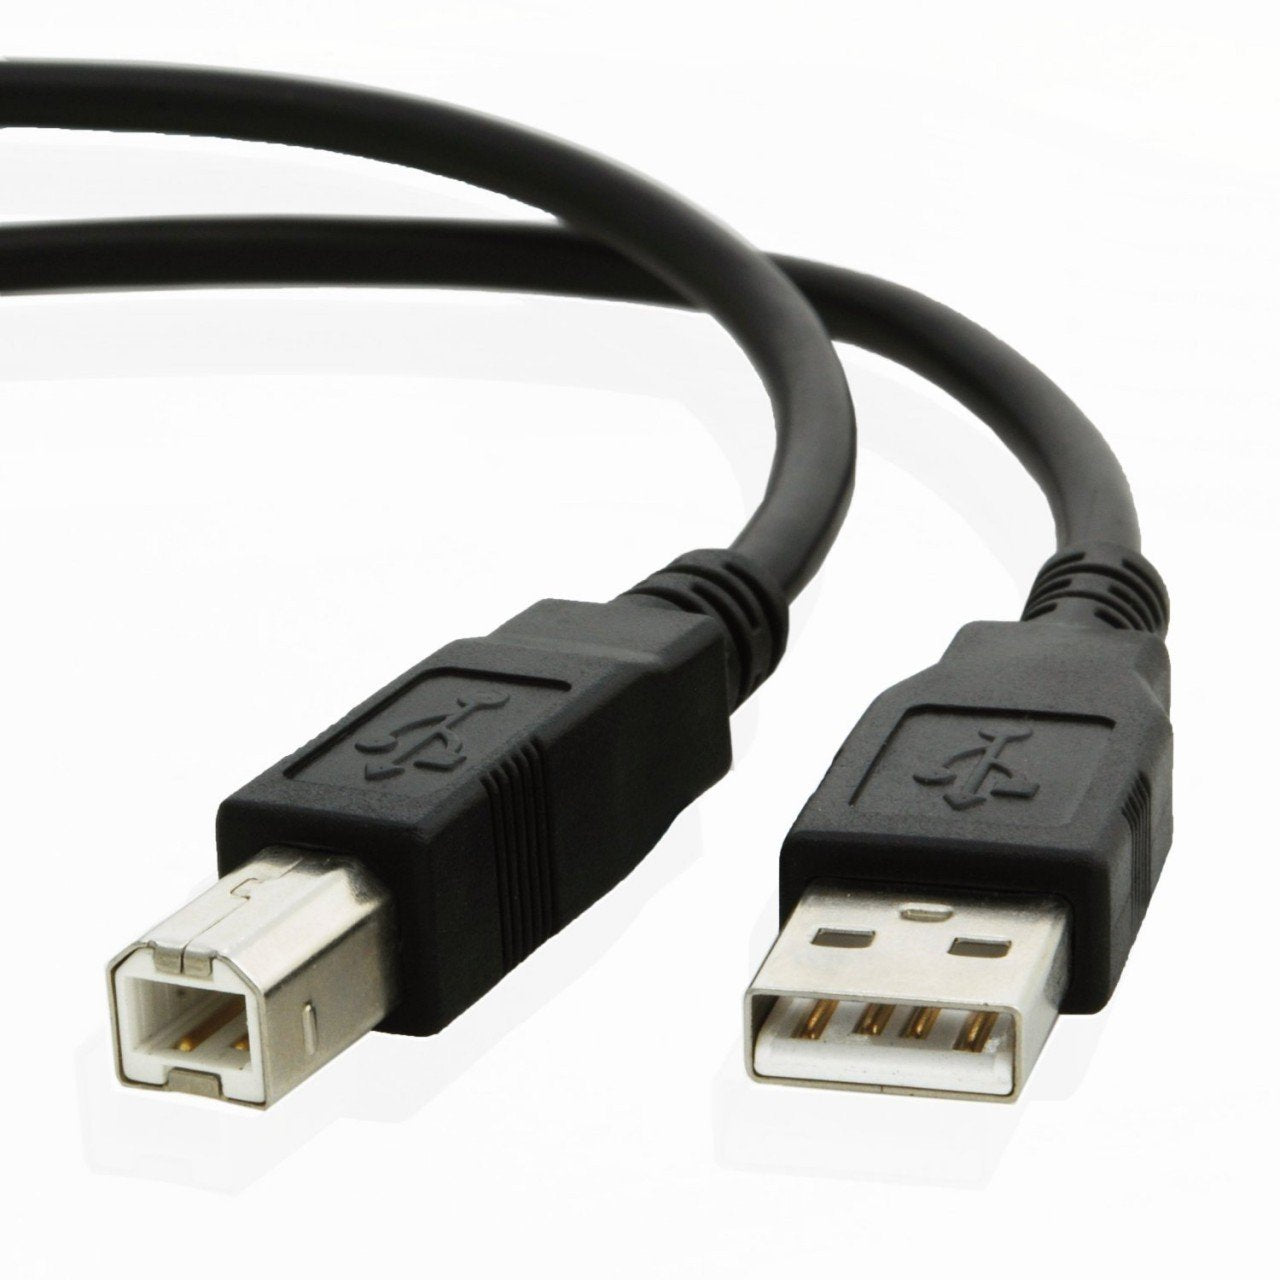 USB cable for Canon IMAGECLASS MF733cdw